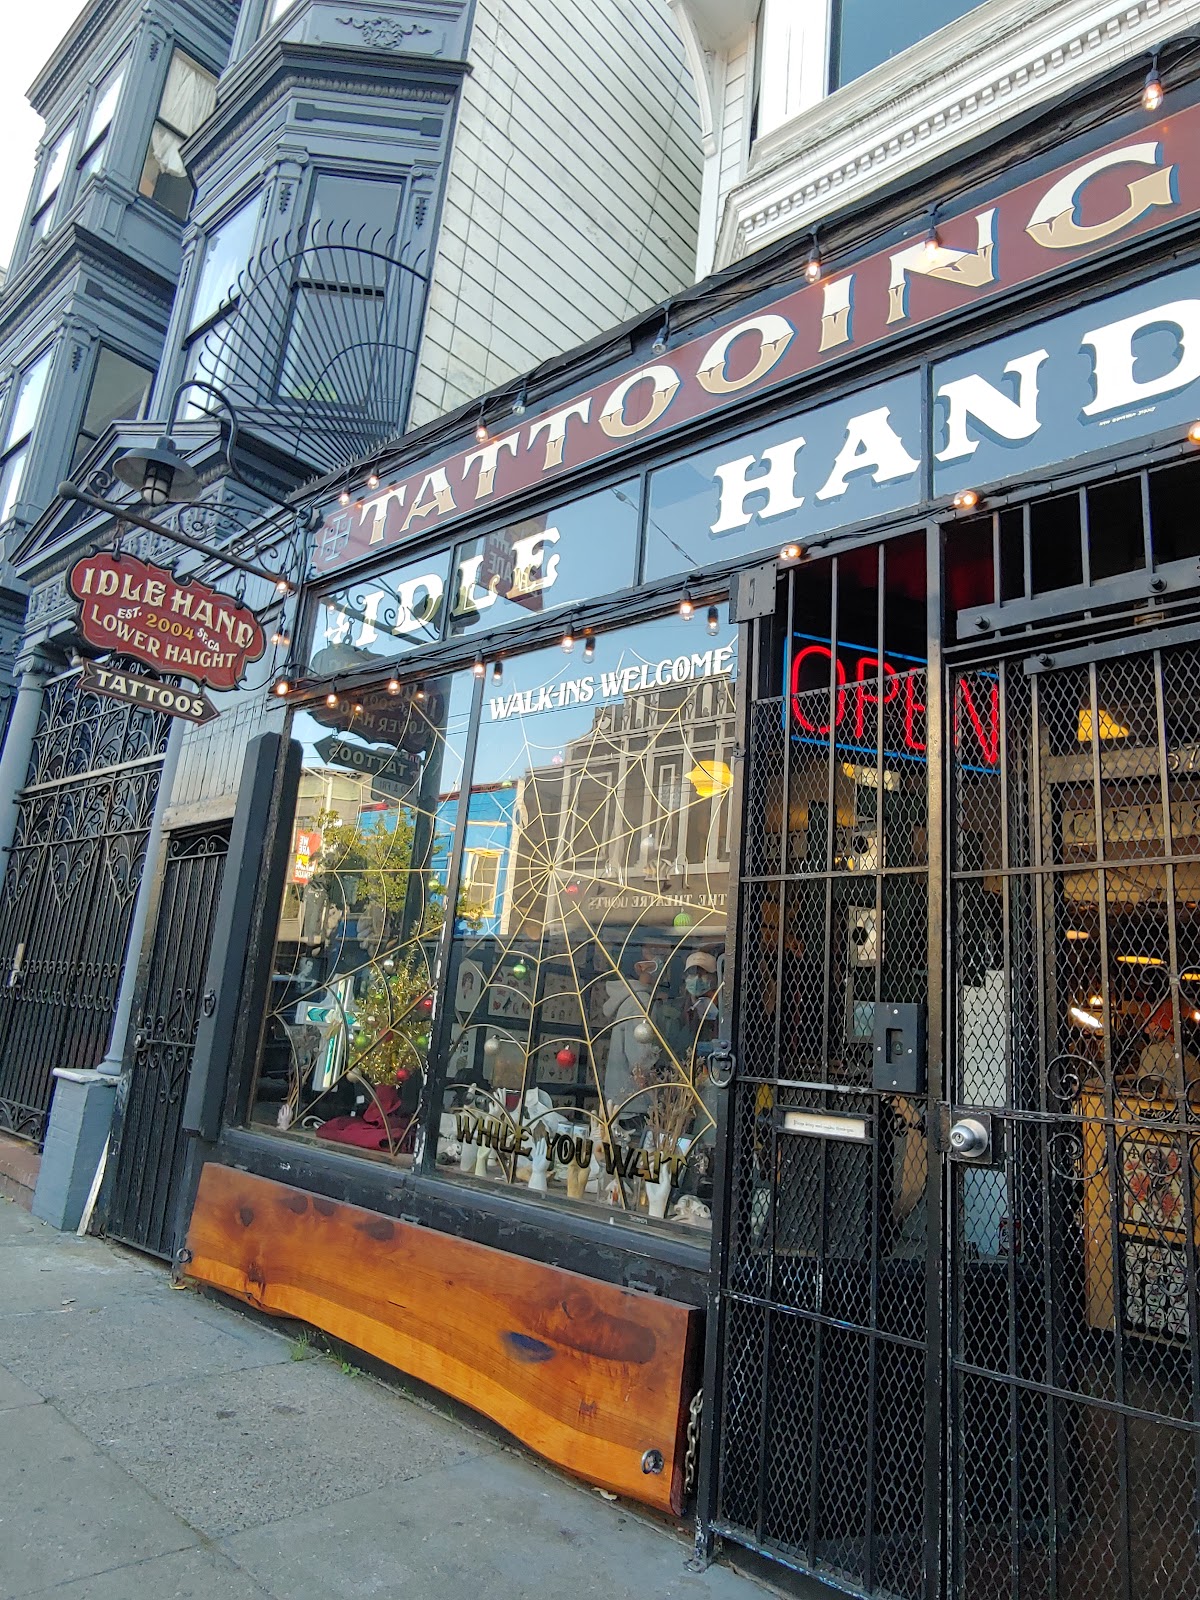 IDLE HANDS TATTOO PARLOUR  185 Photos  110 Reviews  1815 Magazine St  New Orleans Louisiana  Tattoo  Phone Number  Yelp